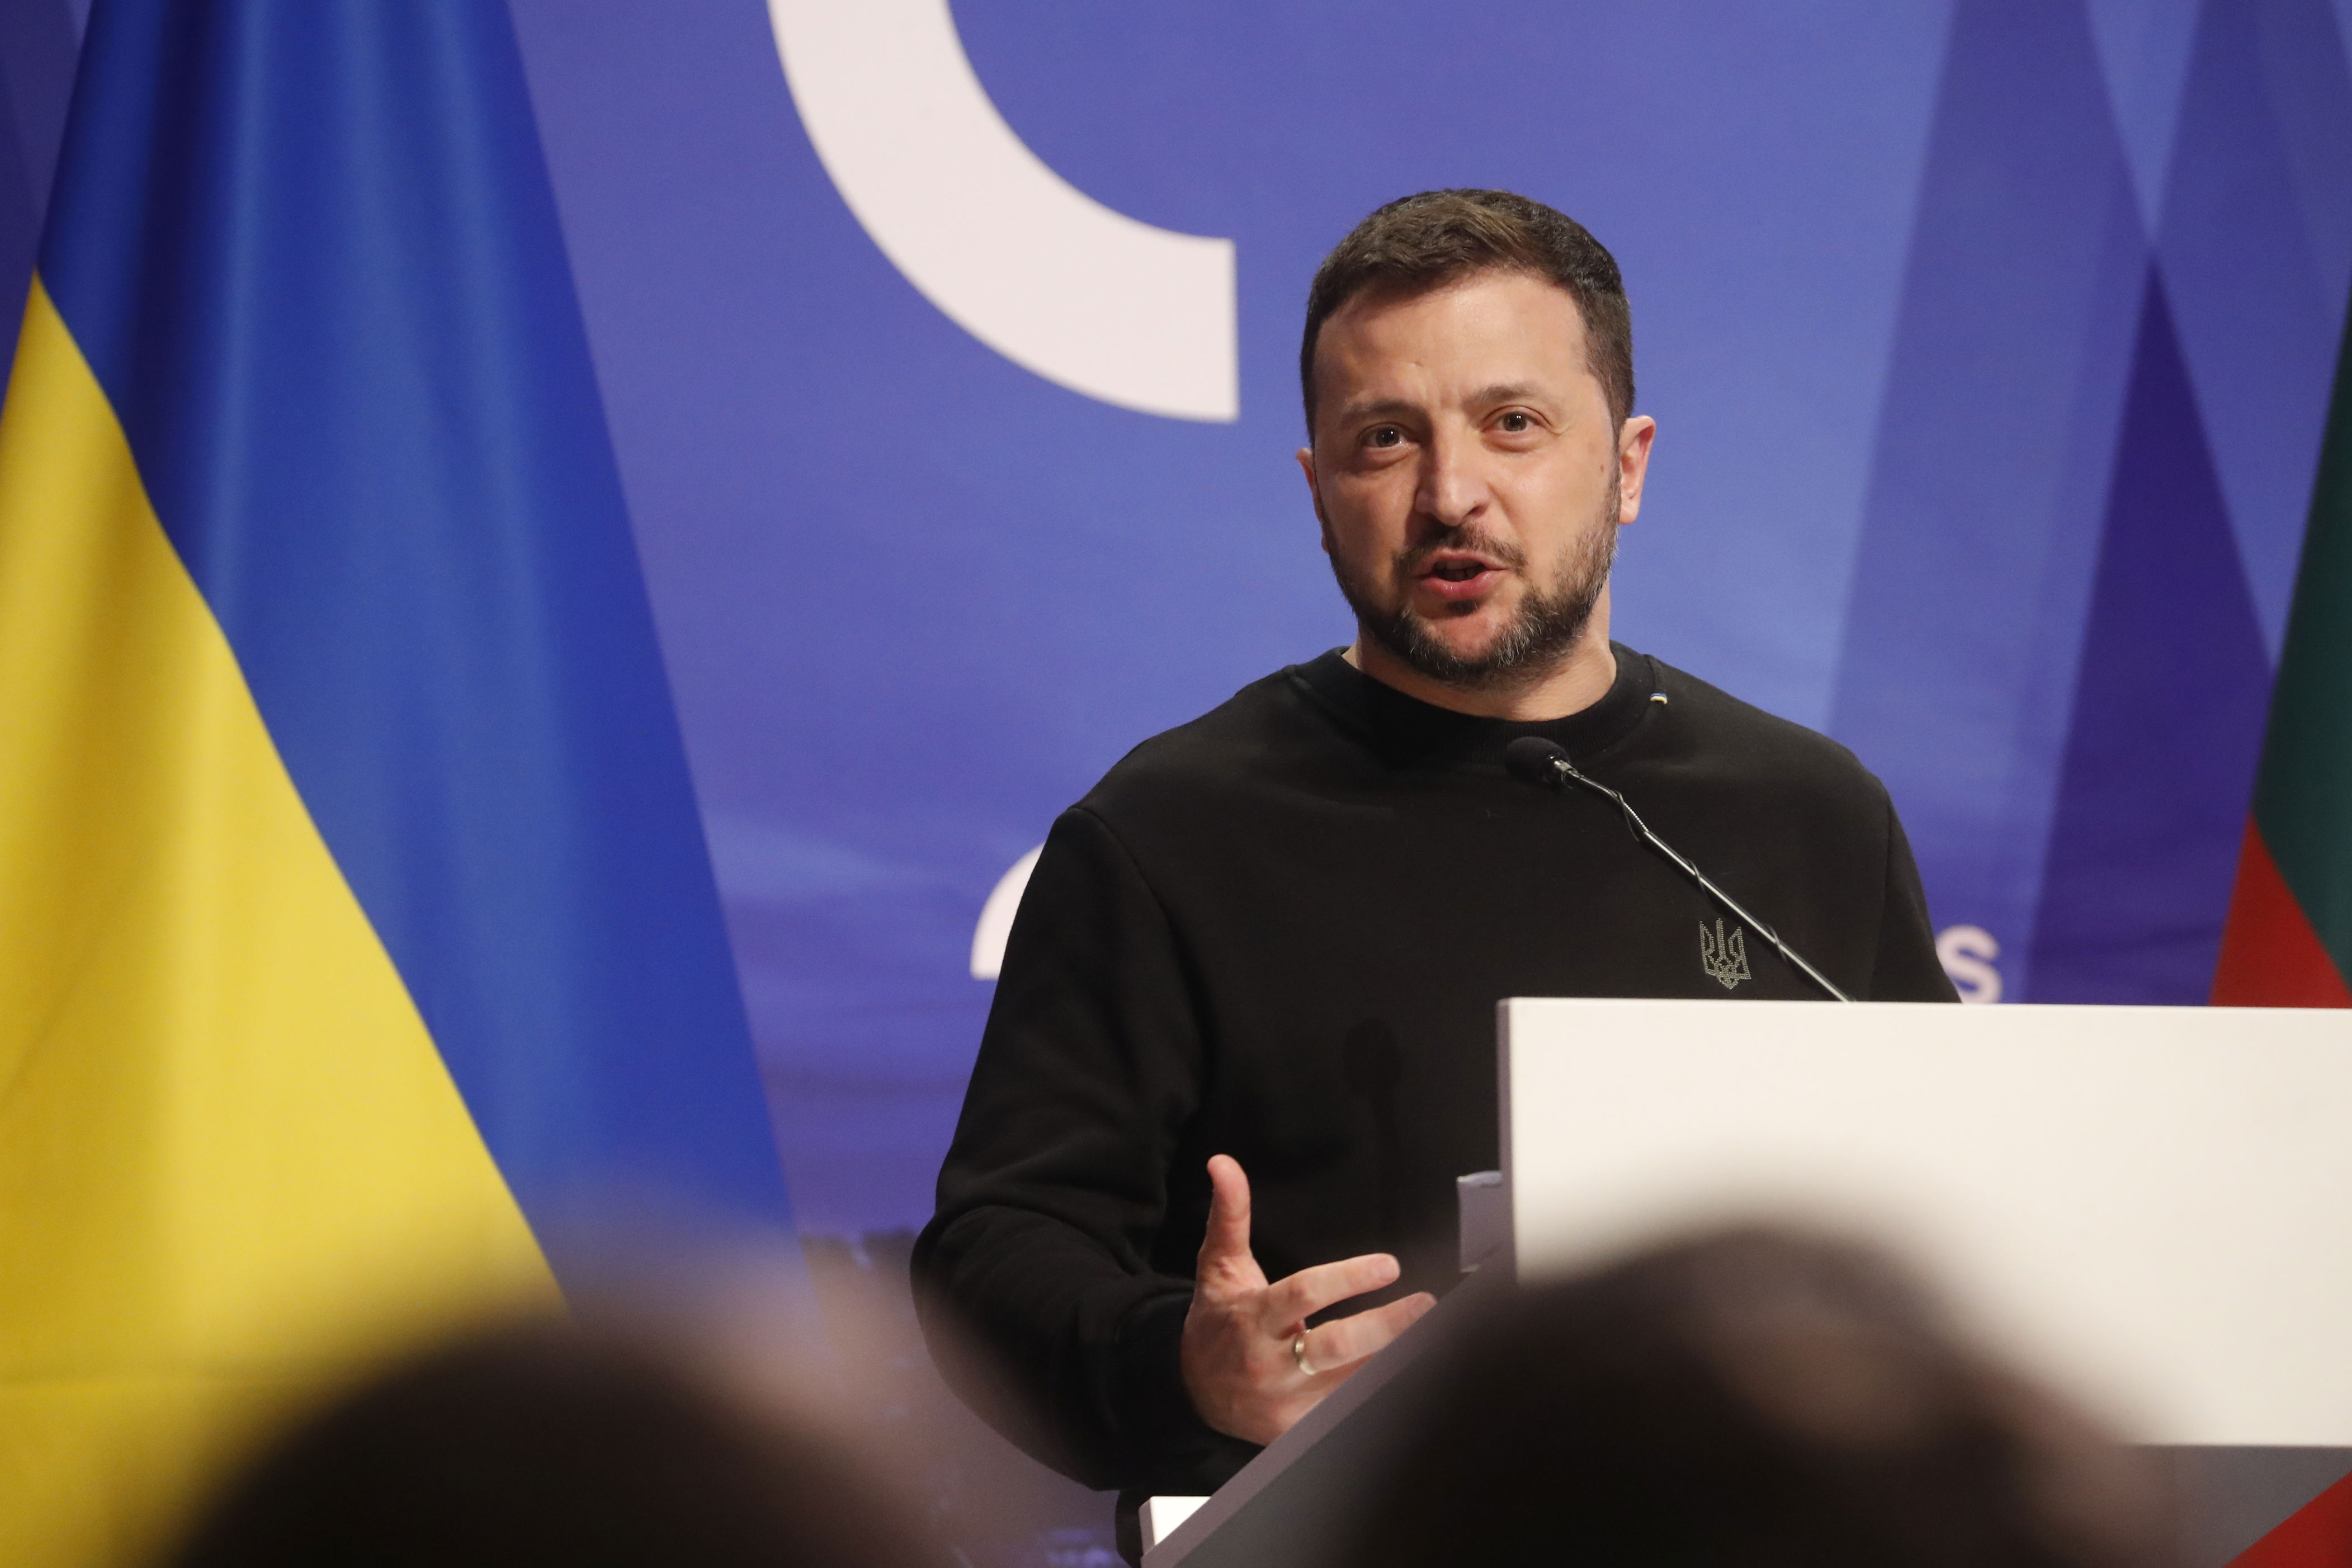 zelensky urges u.s. to send weapons quickly ahead of russian offensive